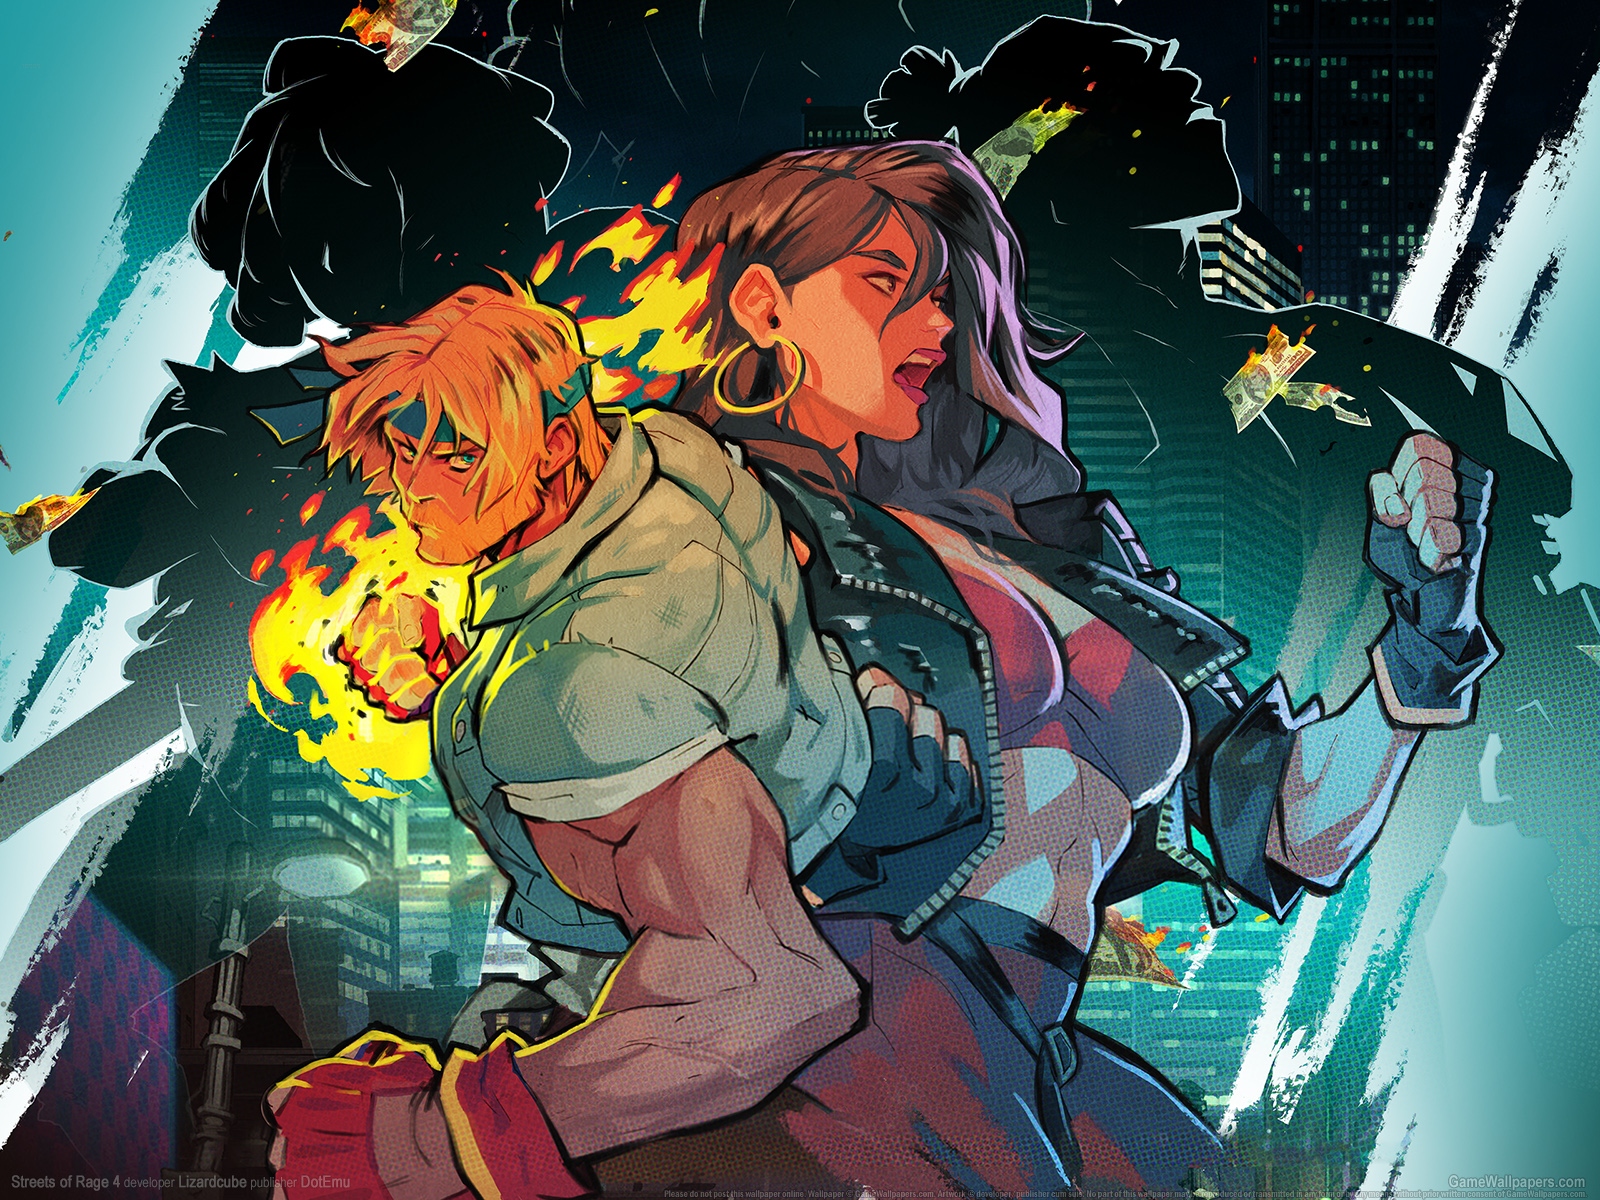 Streets of Rage 4 1600 wallpaper or background 01